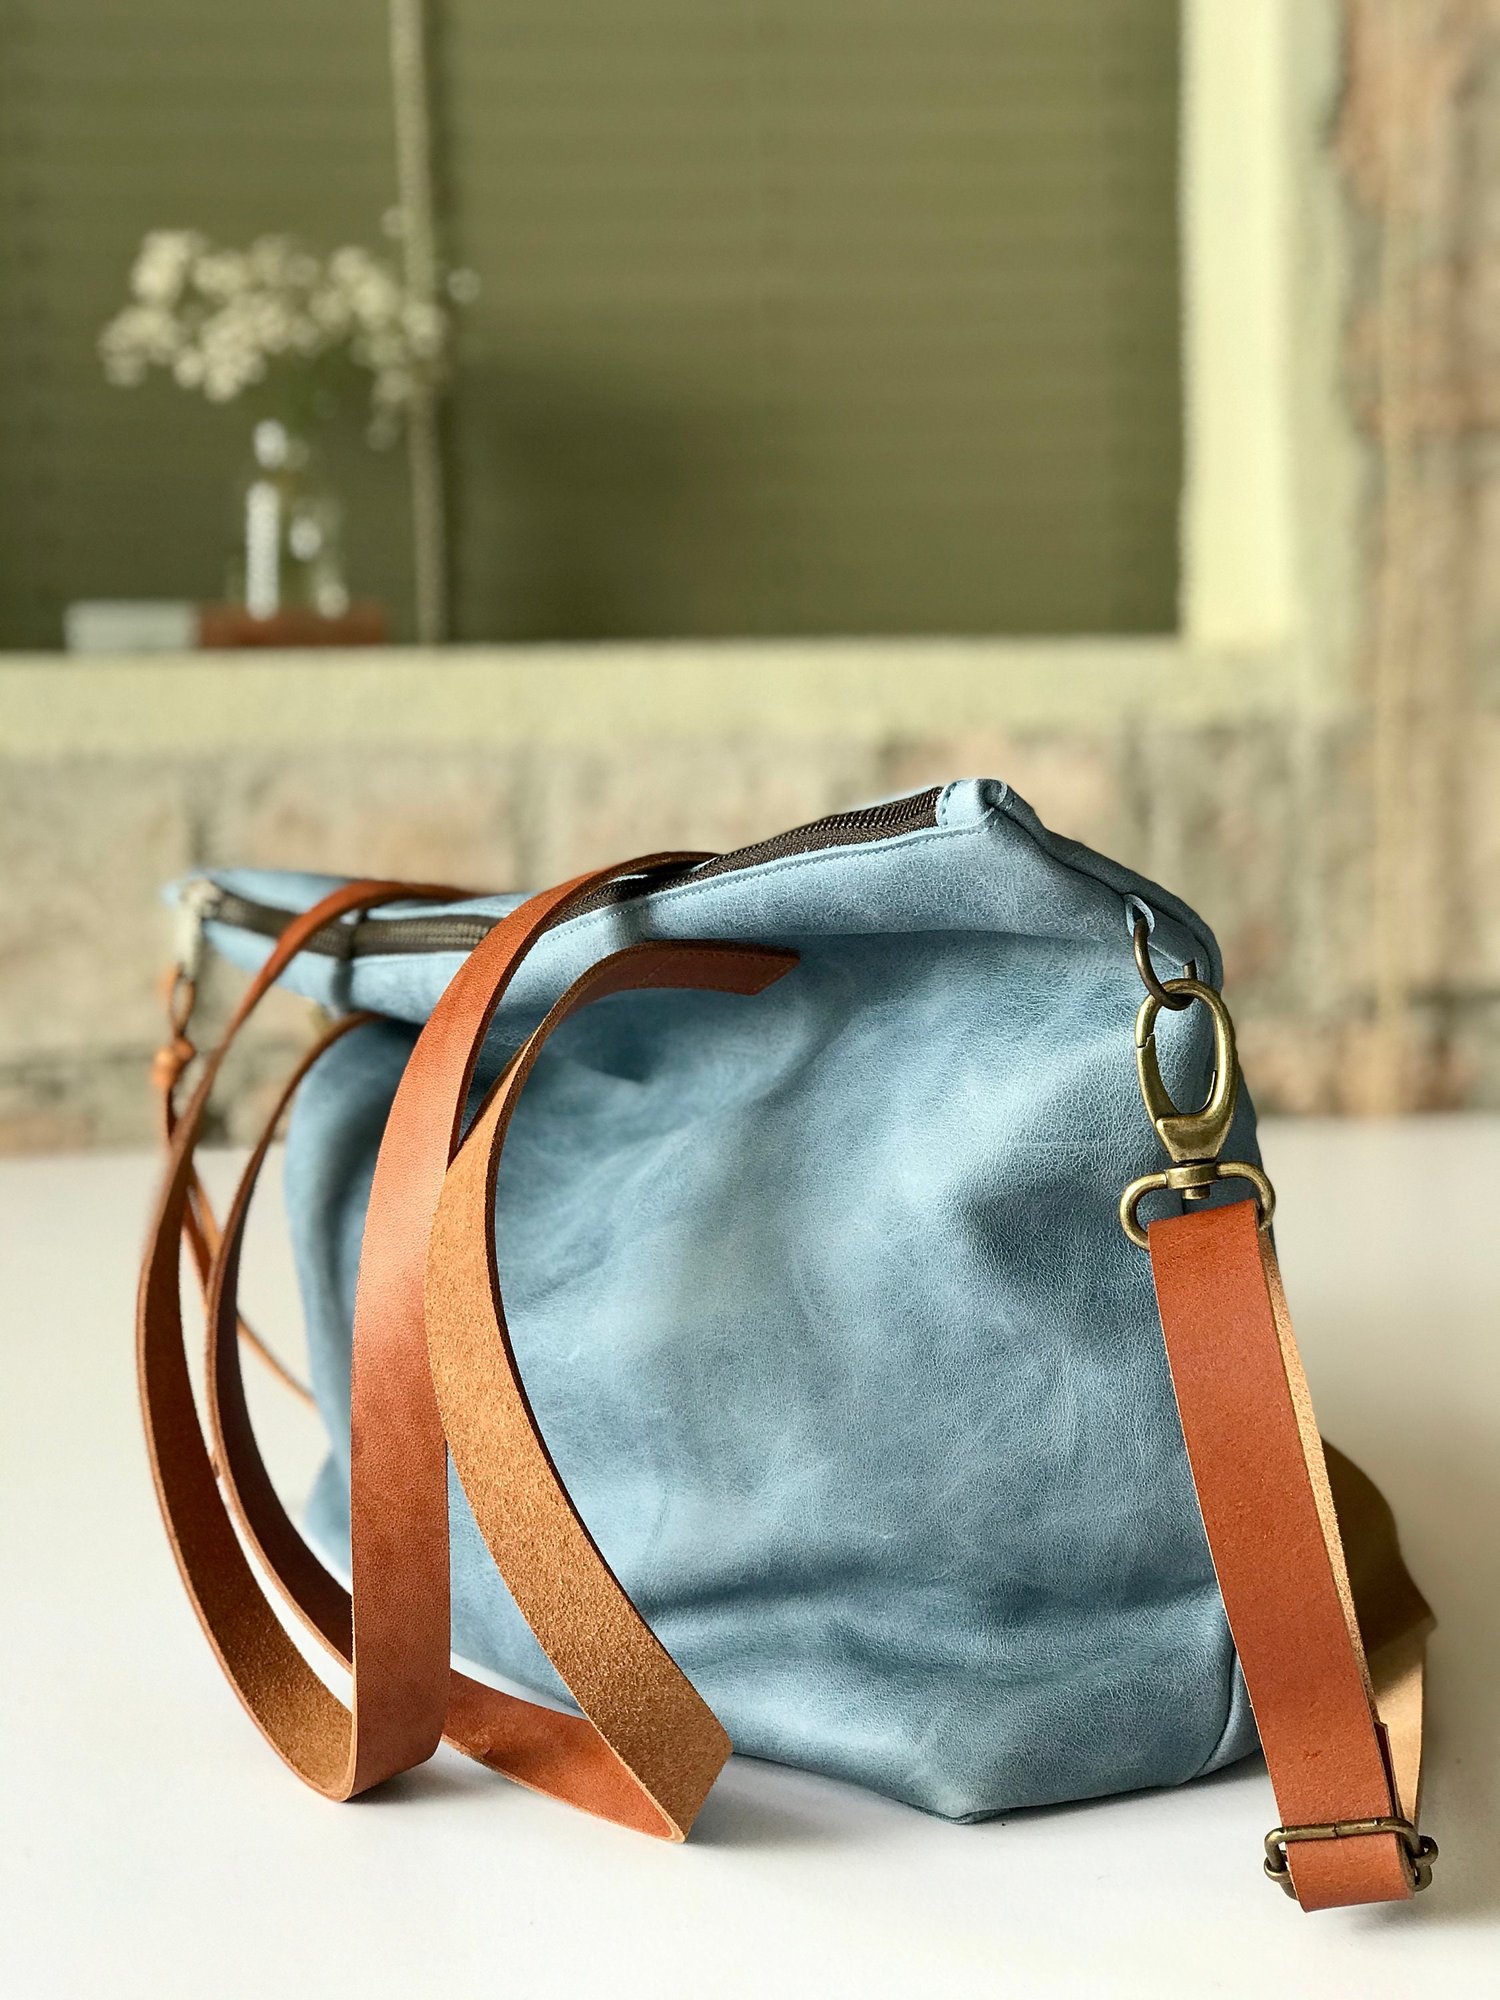 Handmade women's handbag in blue leather with removable shoulder strap